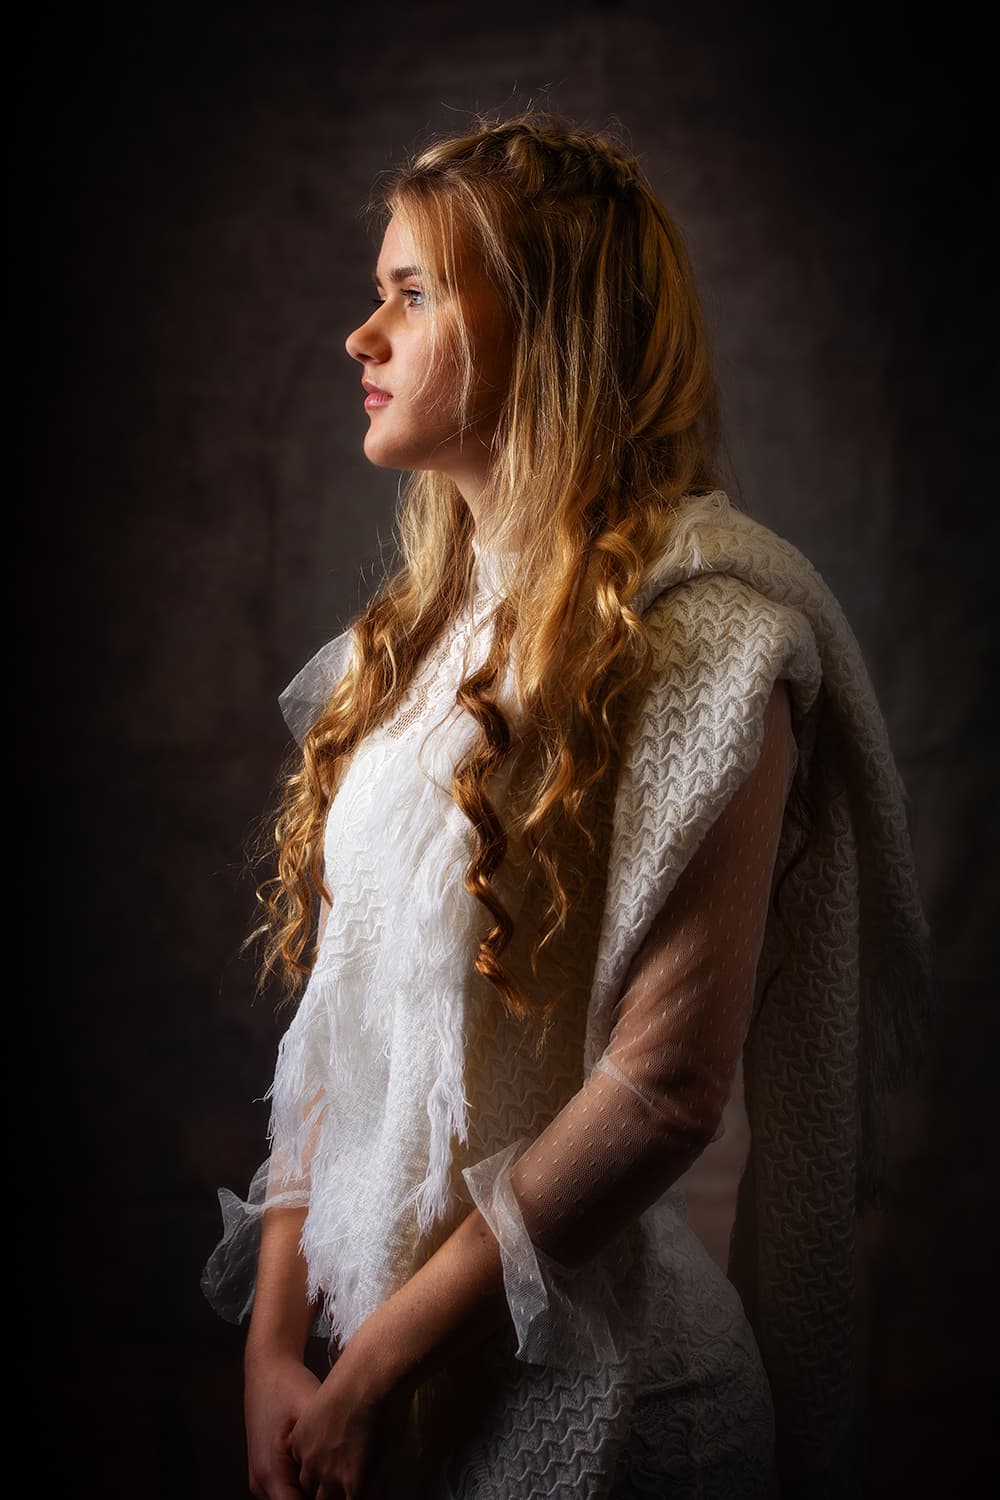 Low lit portrait of a teen profile wearing a white dress witha woollen throw over her shoulder.